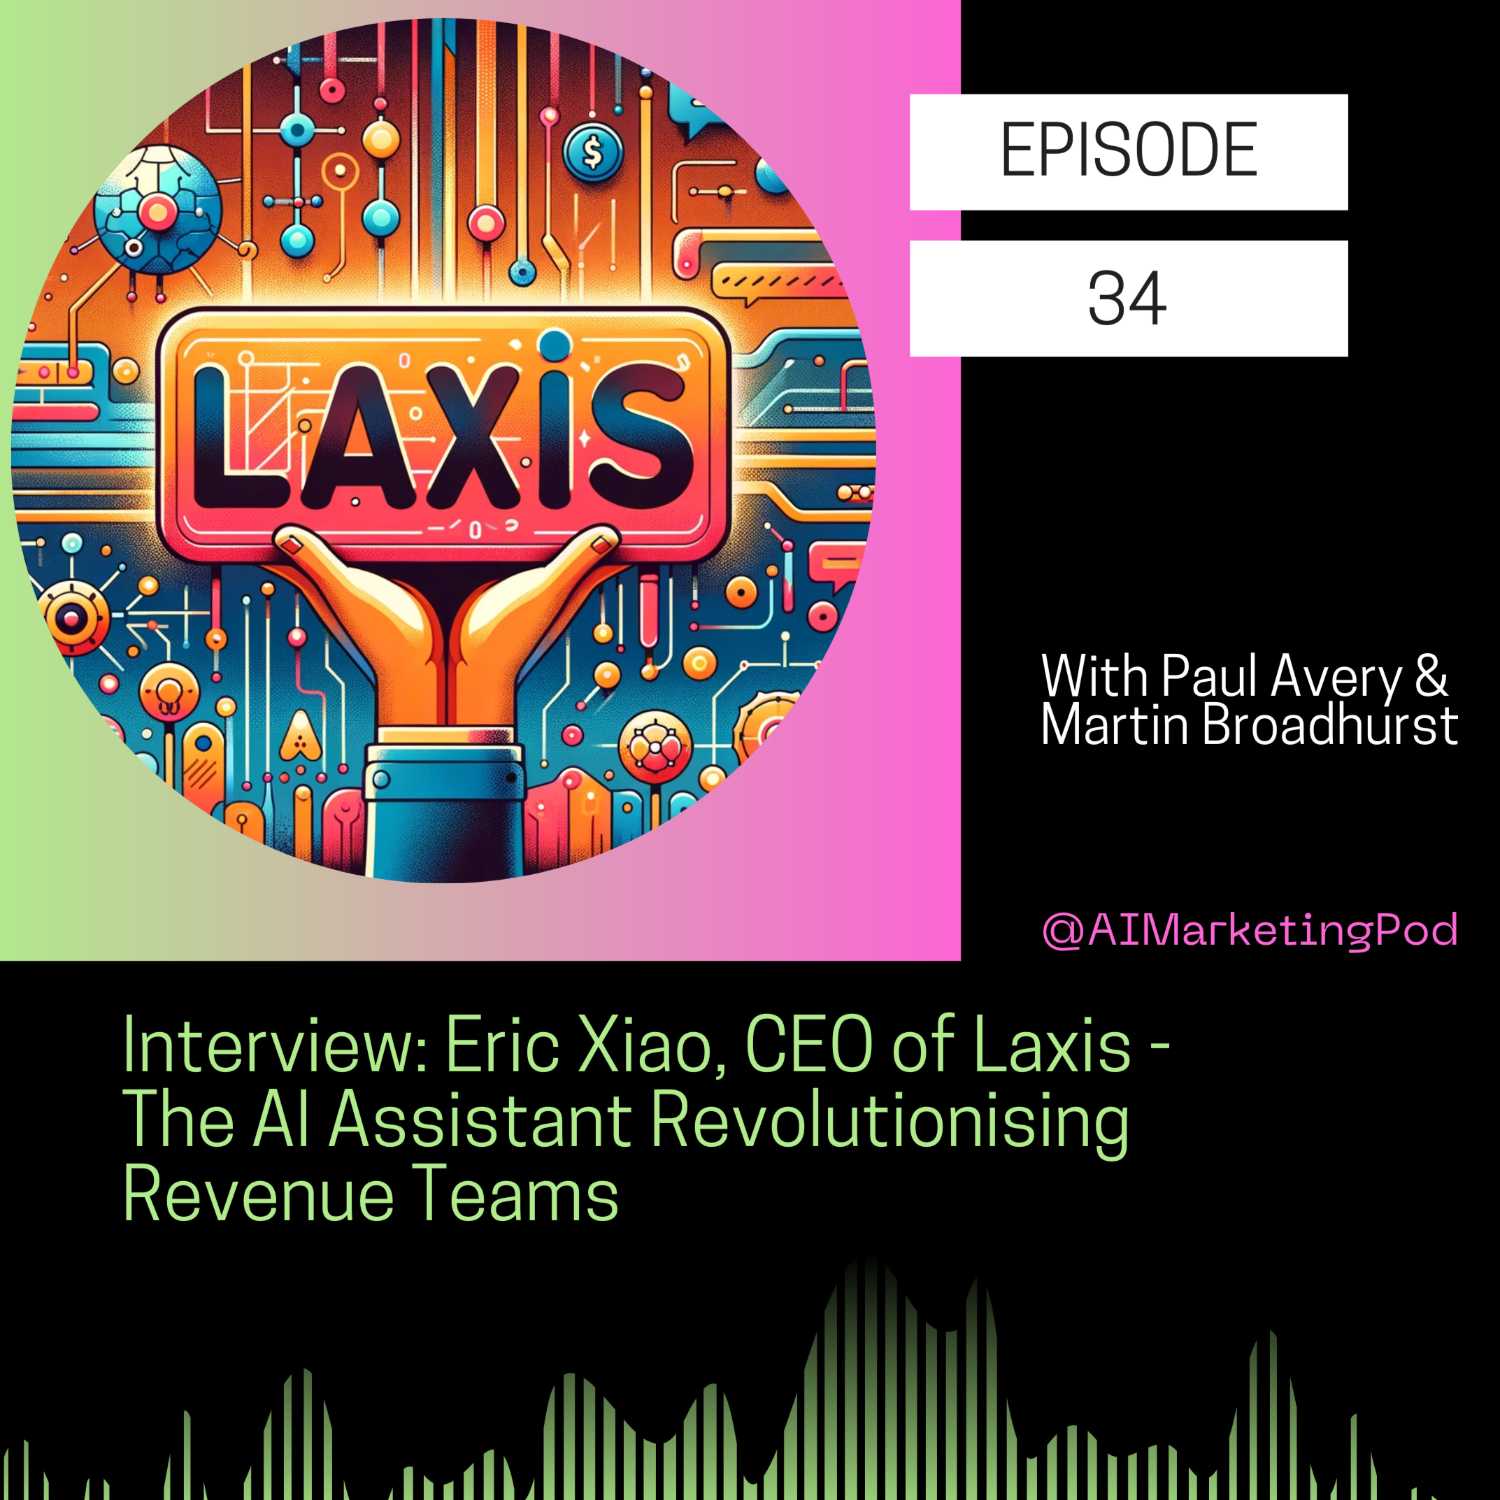 Interview: Eric Xiao, CEO of Laxis - The AI Assistant Revolutionising Revenue Teams